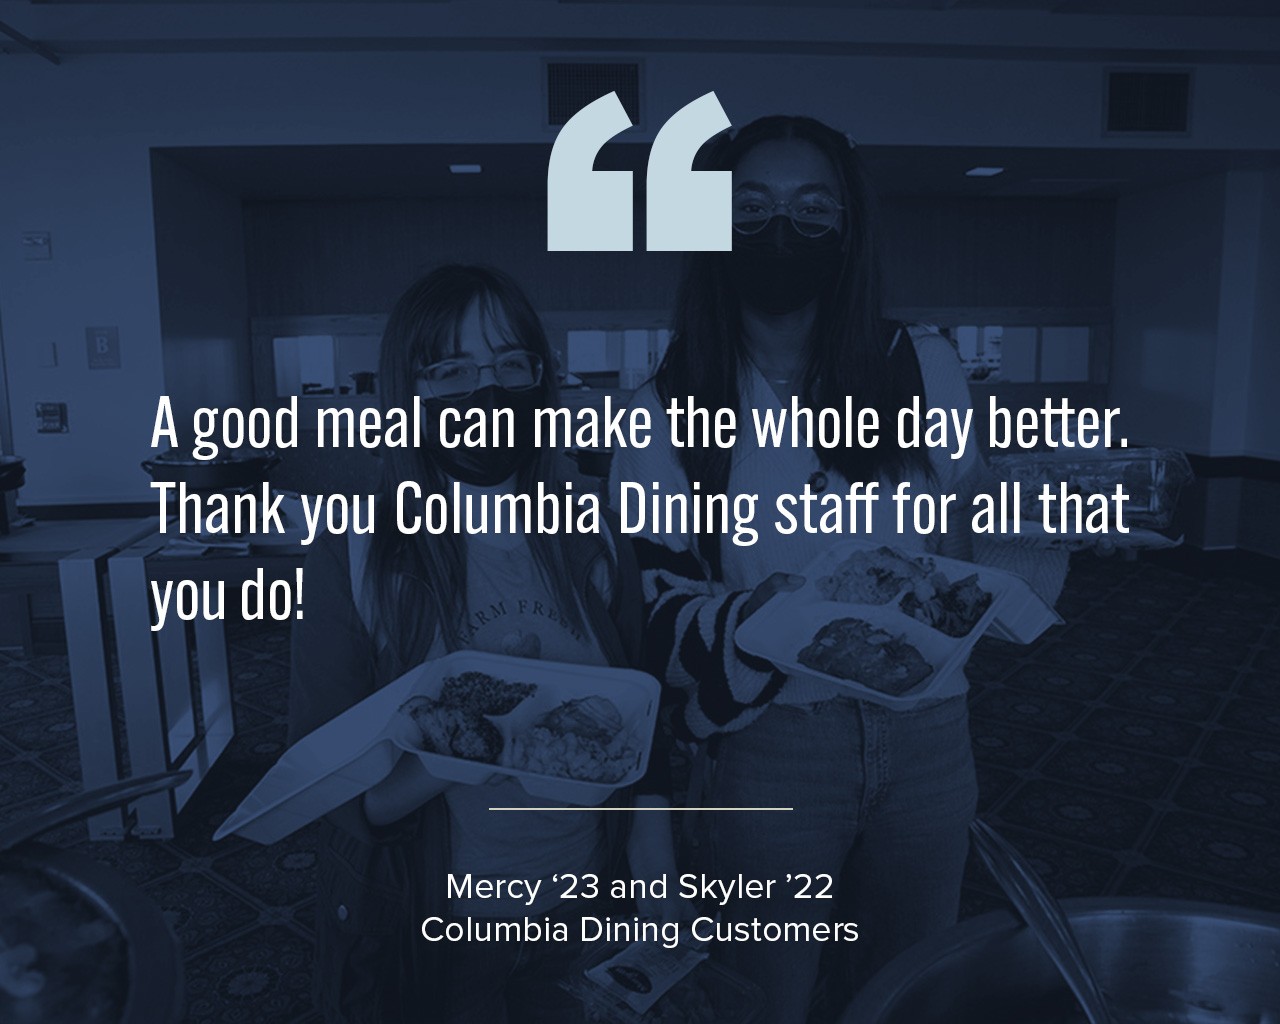 A quote from two Columbia Dining customers that says, "A good meal can make the whole day better. Thank you Columbia Dining staff for all that you do!" with two students in the background holding to-go containers.